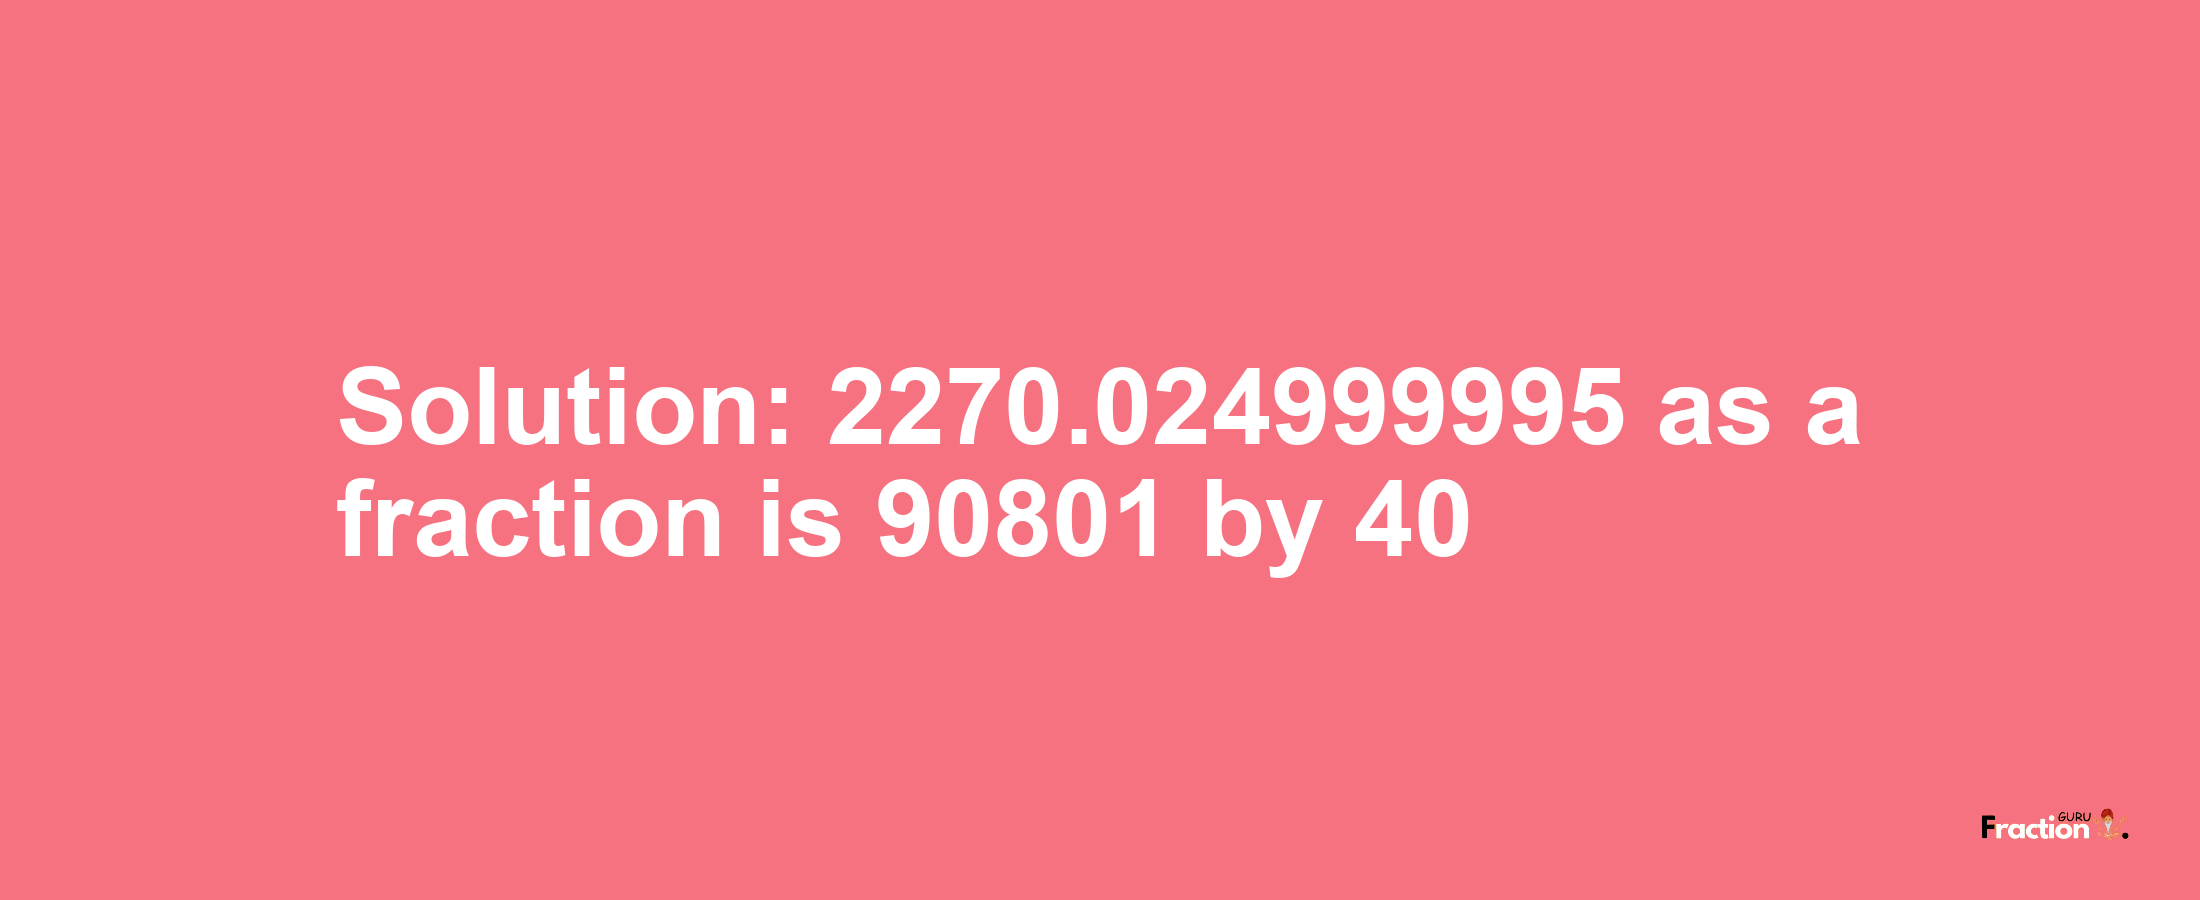 Solution:2270.024999995 as a fraction is 90801/40